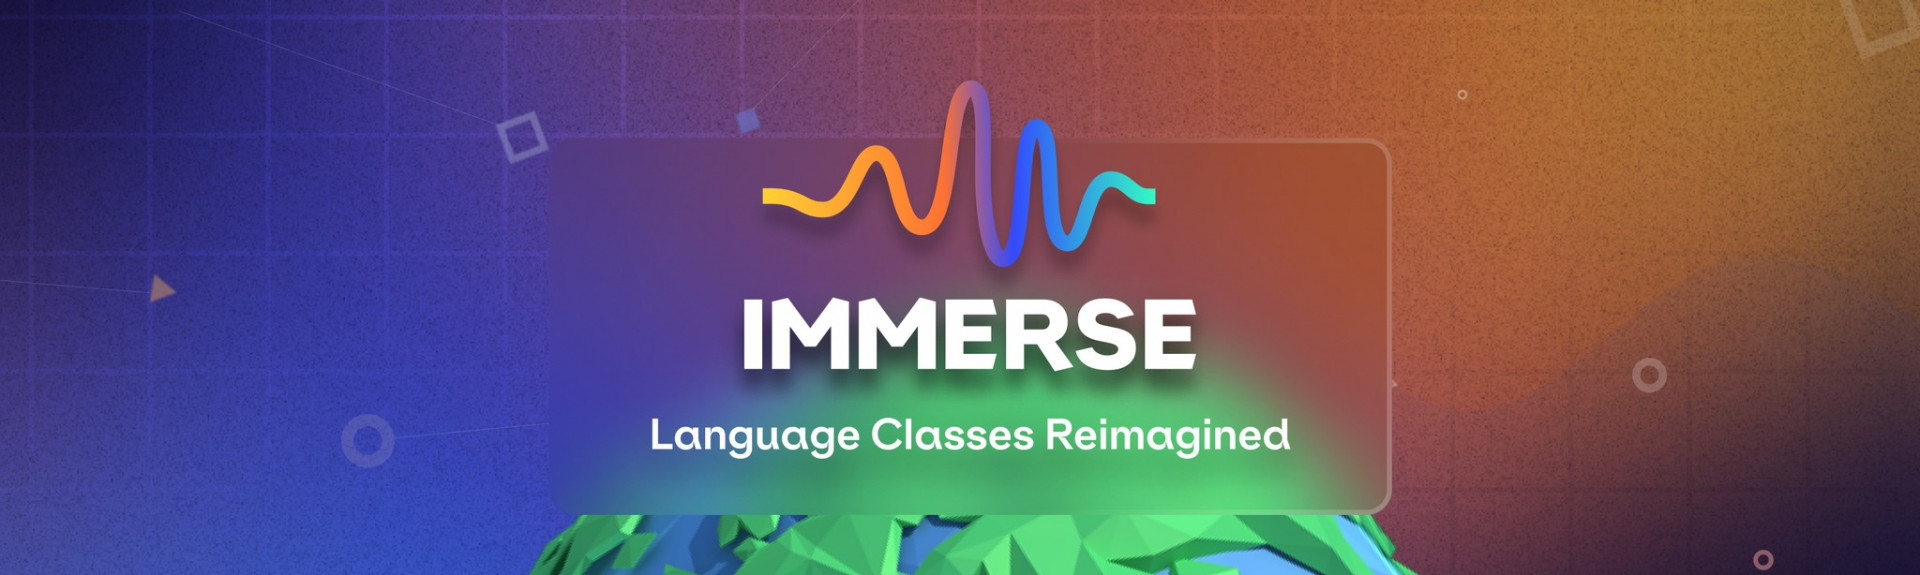 Immerse - Live Language Classes Led By Expert Teachers